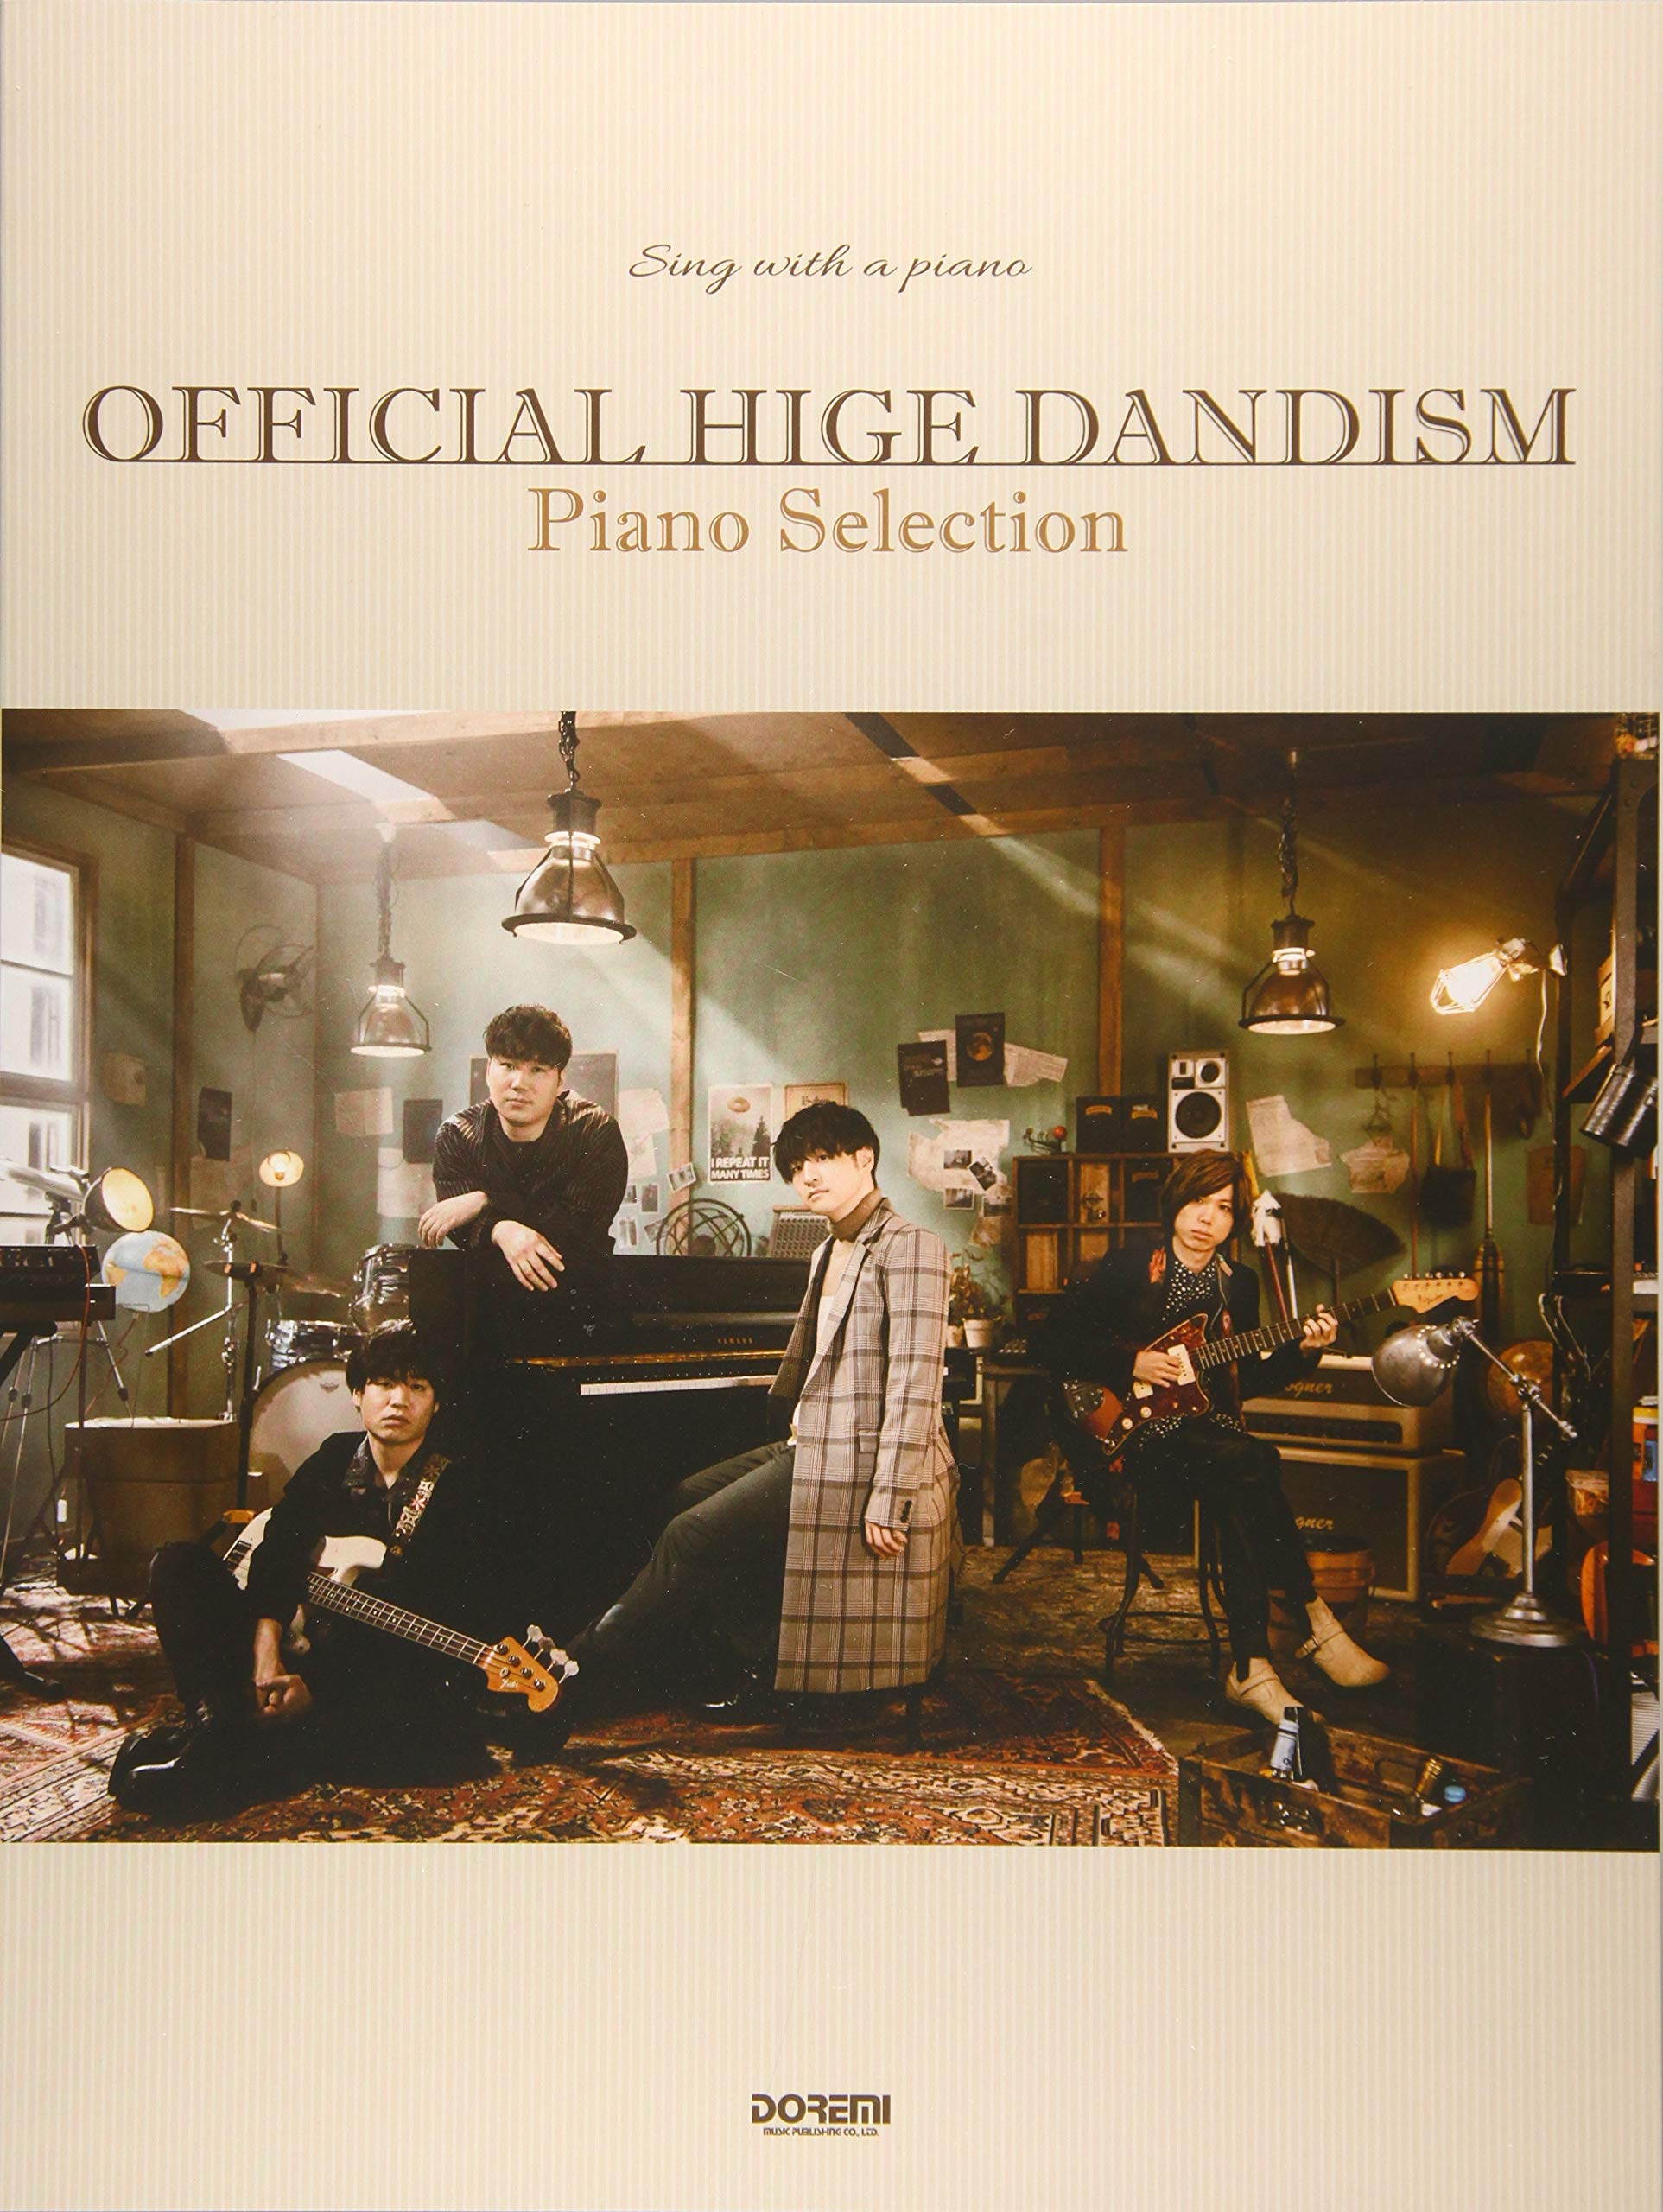 OFFICIAL HIGE DANDISM / PIANO SELECTION